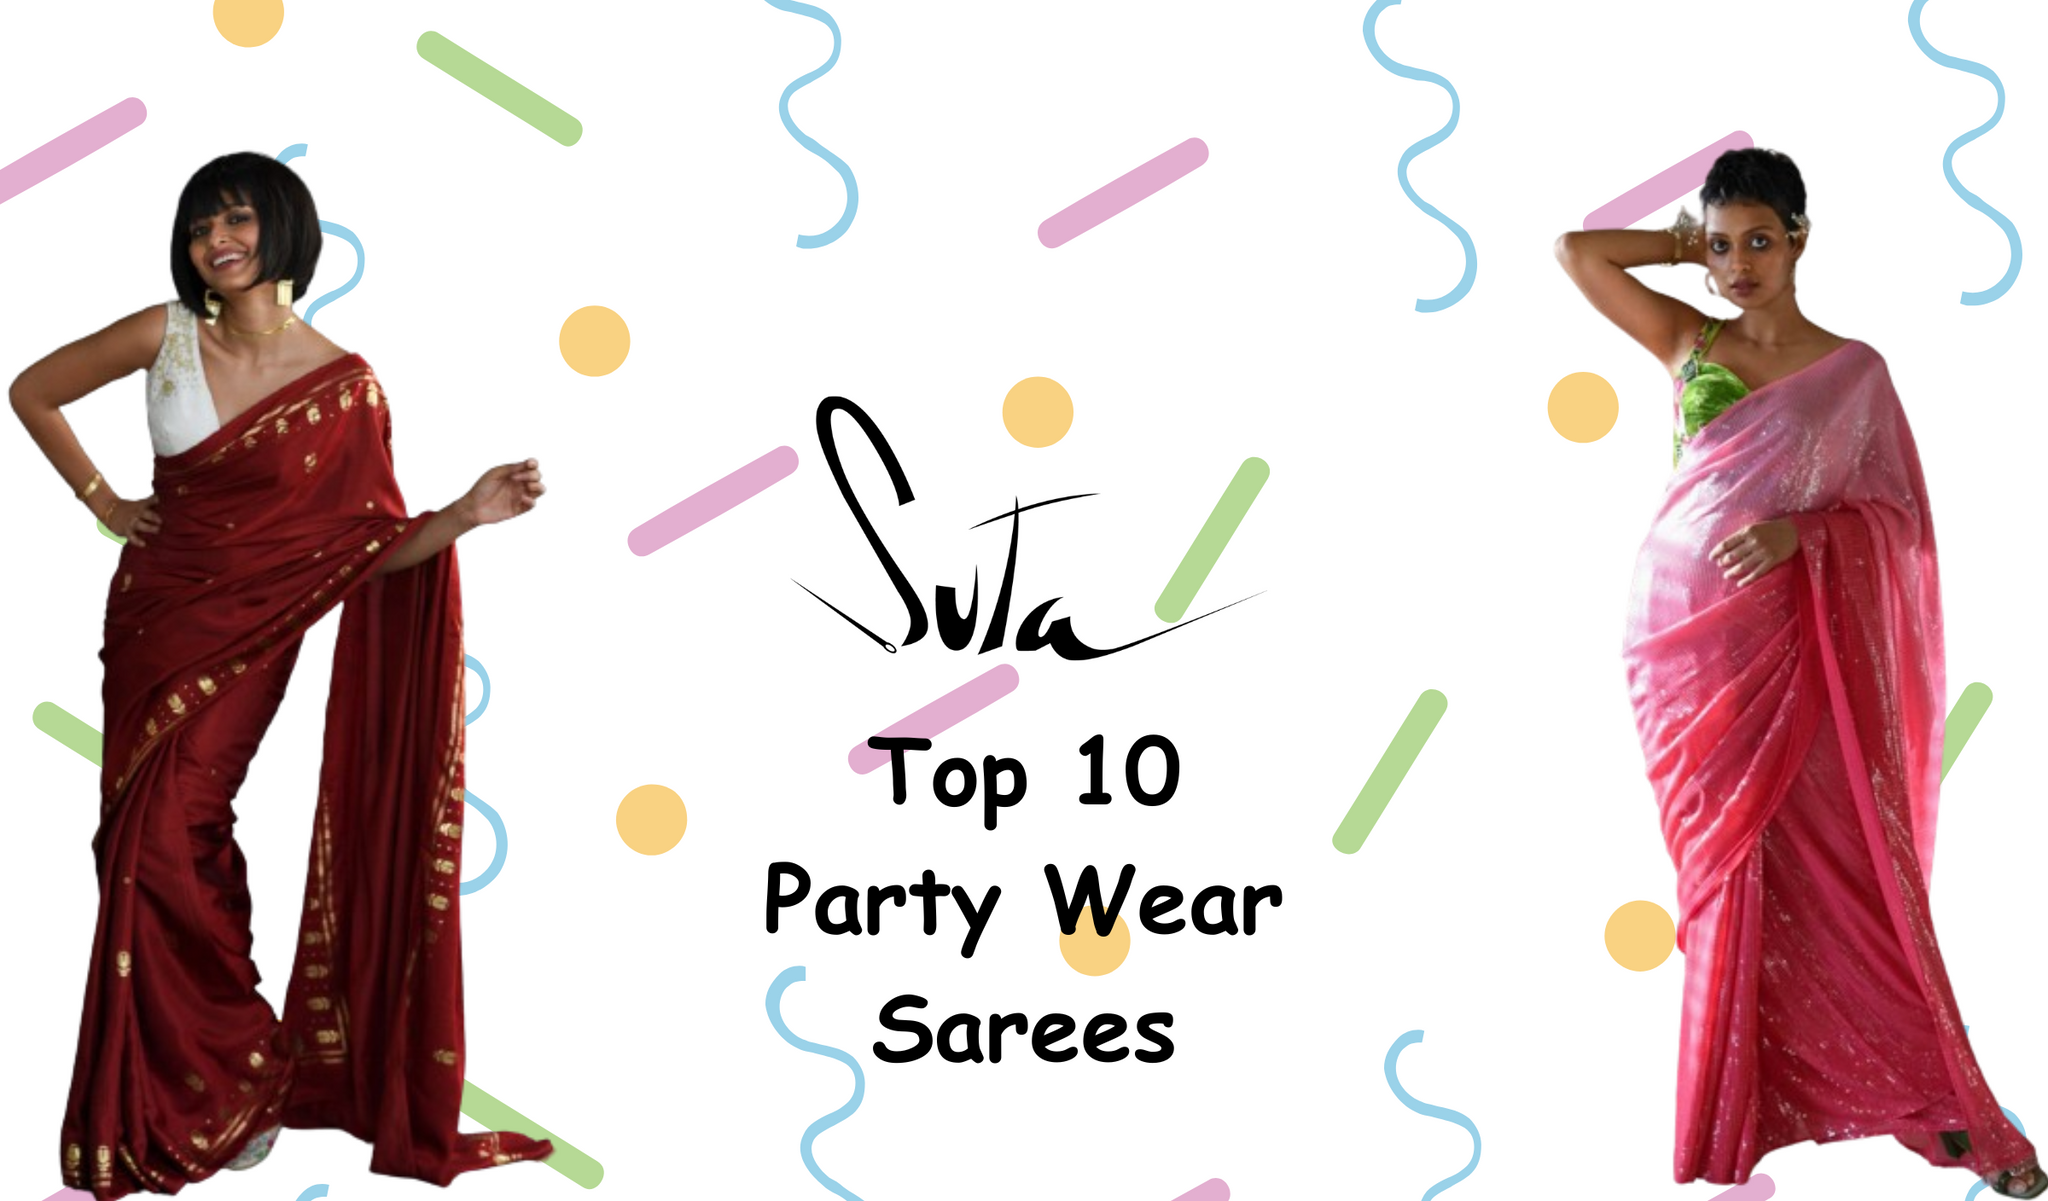 Elevate Your Party Look: Top 10 Party Wear Sarees from Suta